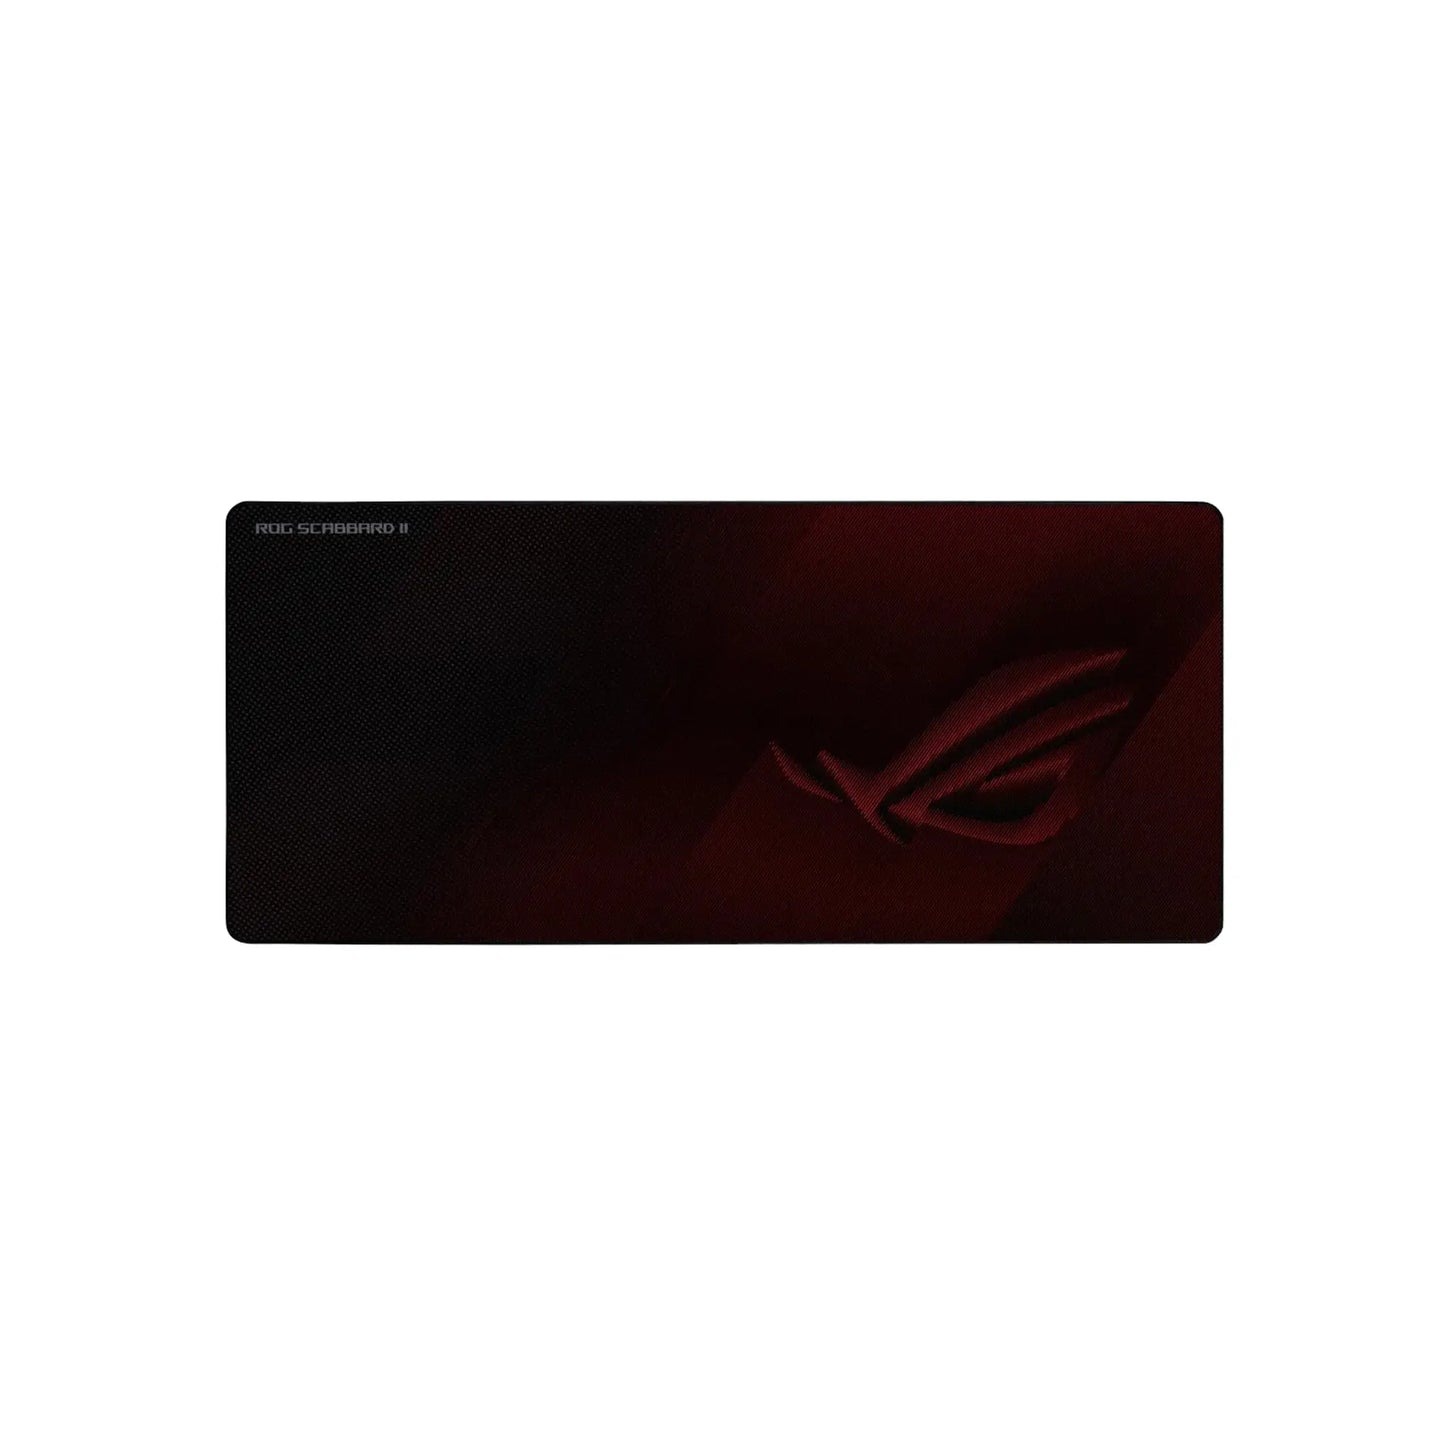 Asus rog scabbard ii mouse pad rog scabbard ii mouse pad 90MP0210-BPUA00 ASUS